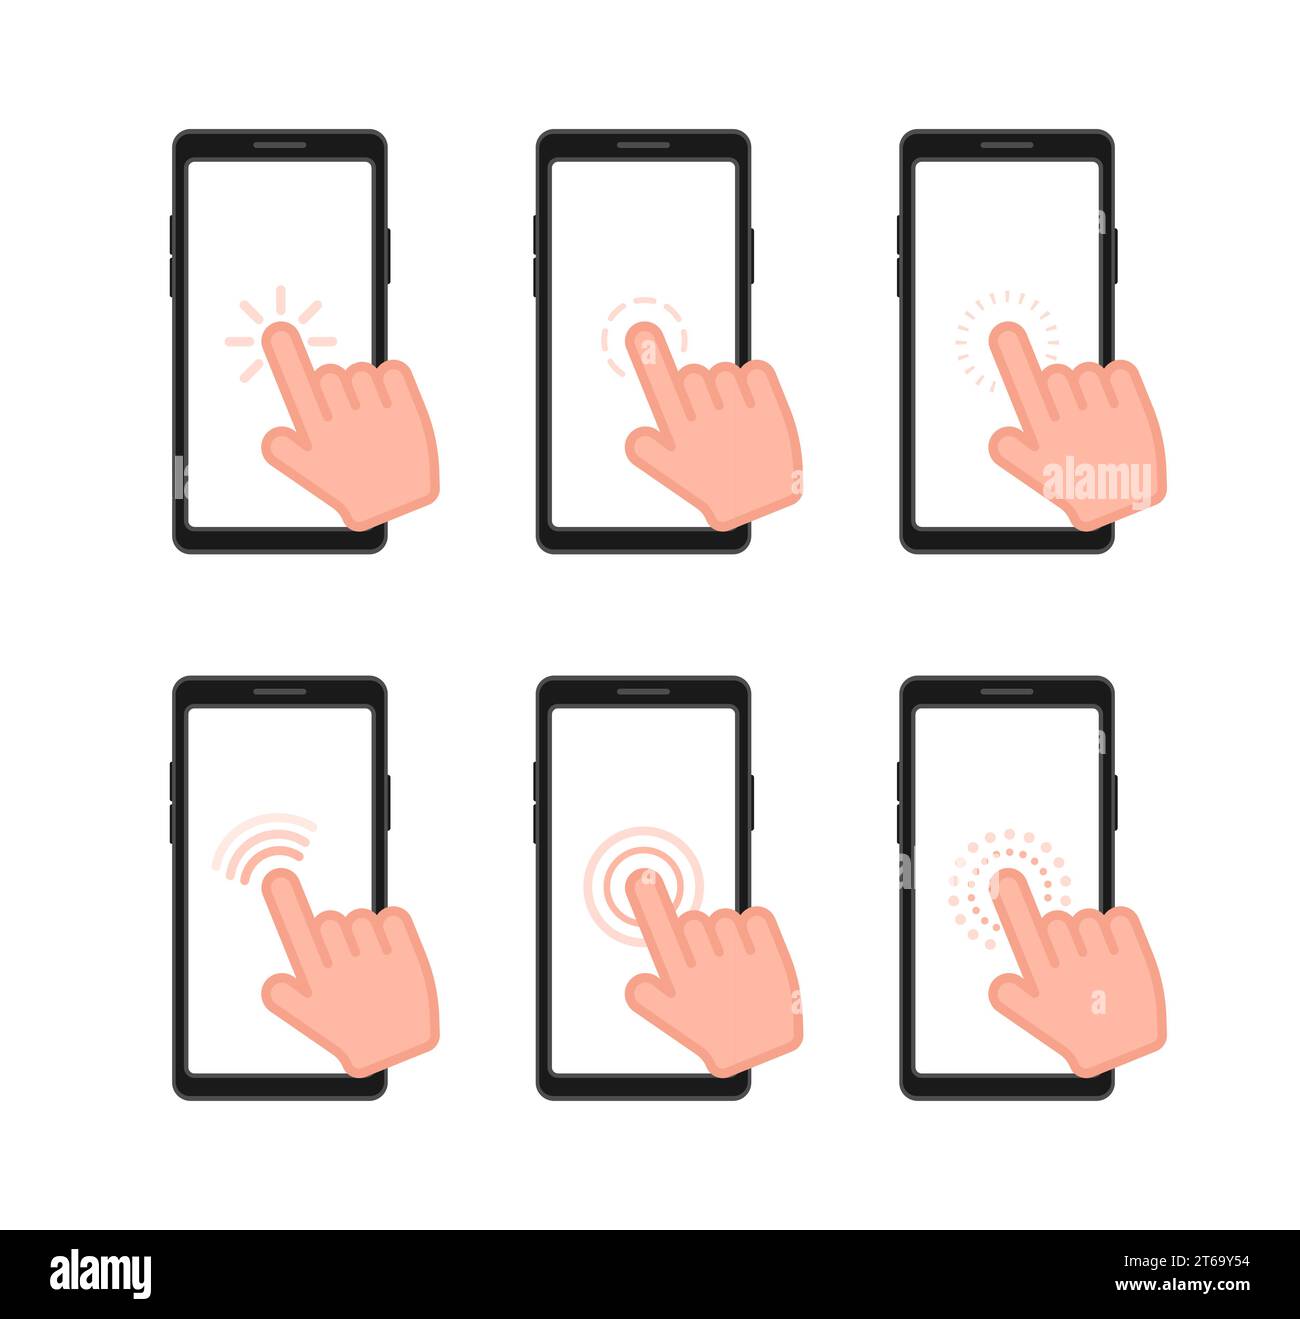 Set of Touch Screen Gestures for Smartphone Interface. Vector illustration Stock Vector